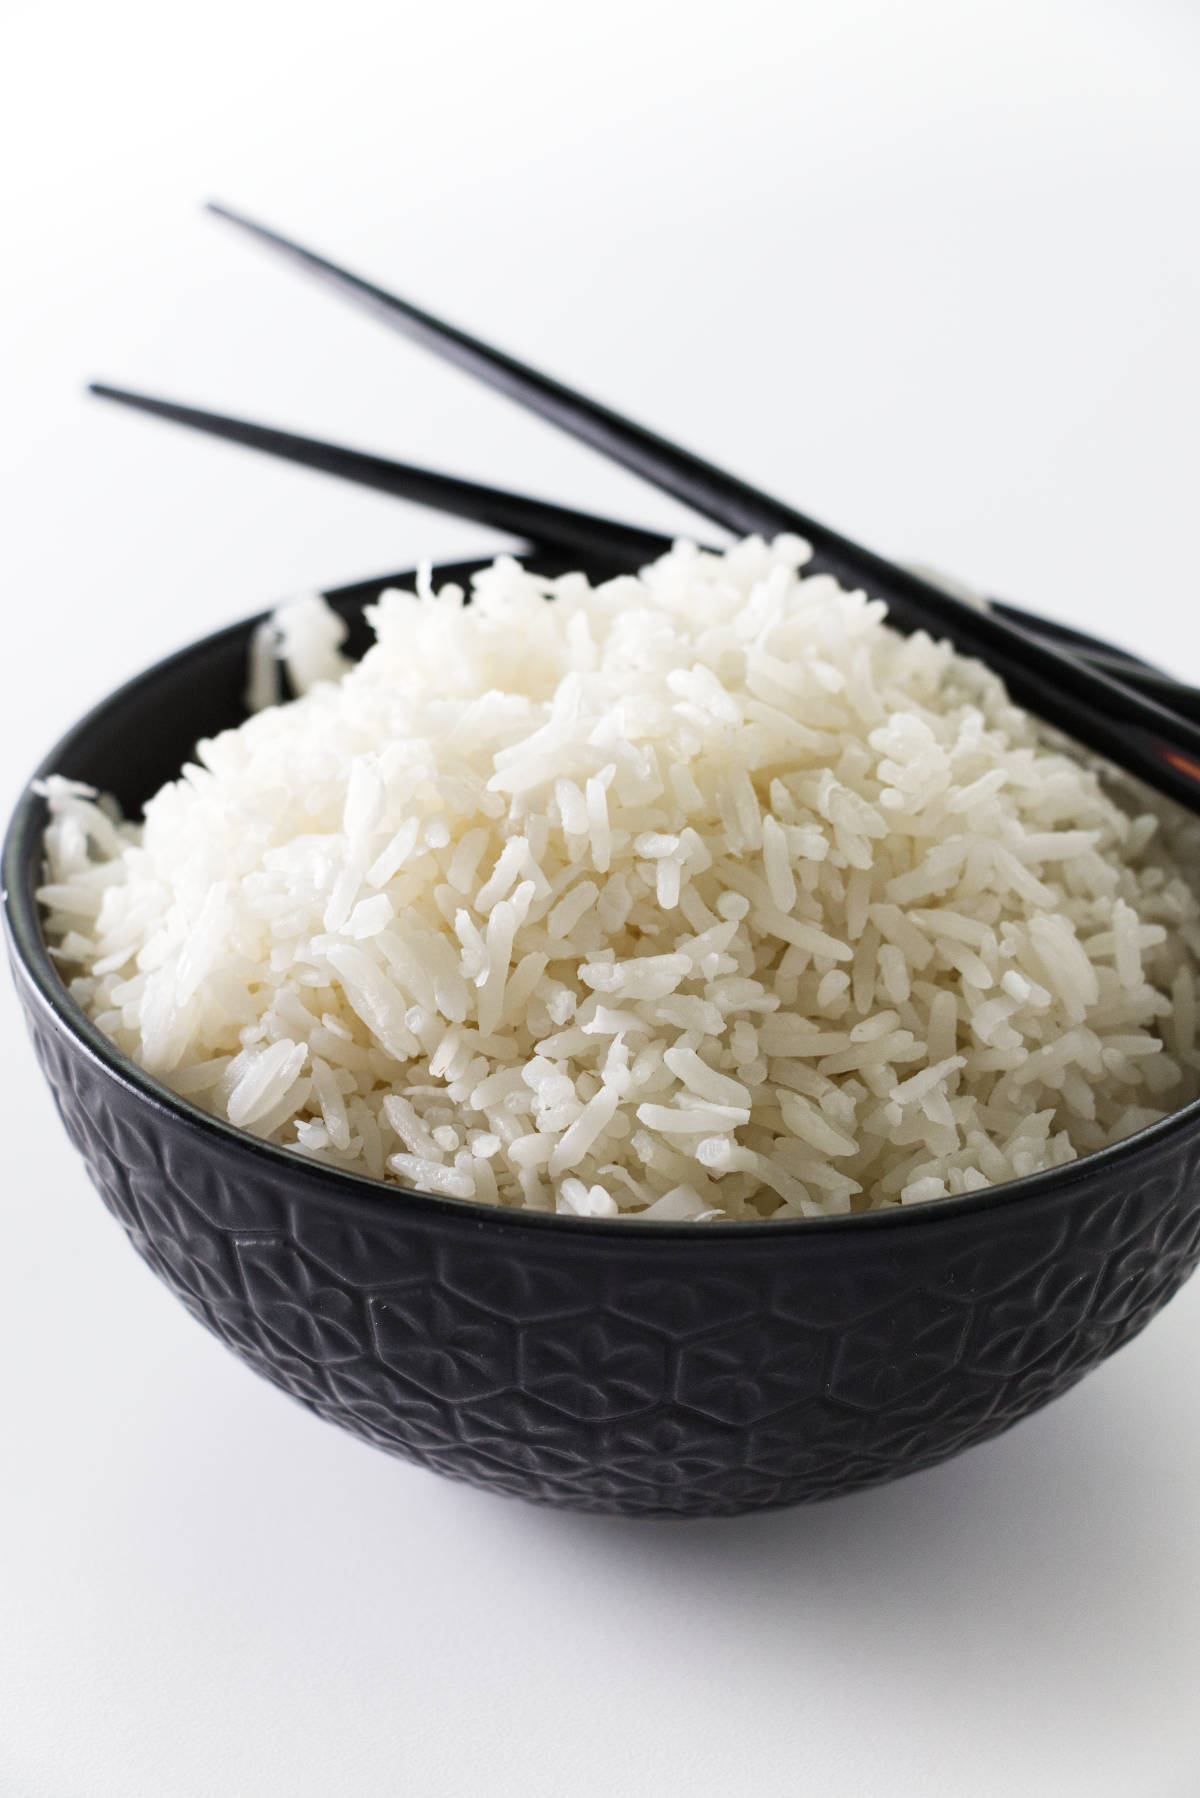 A serving of fluffy Coconut Rice